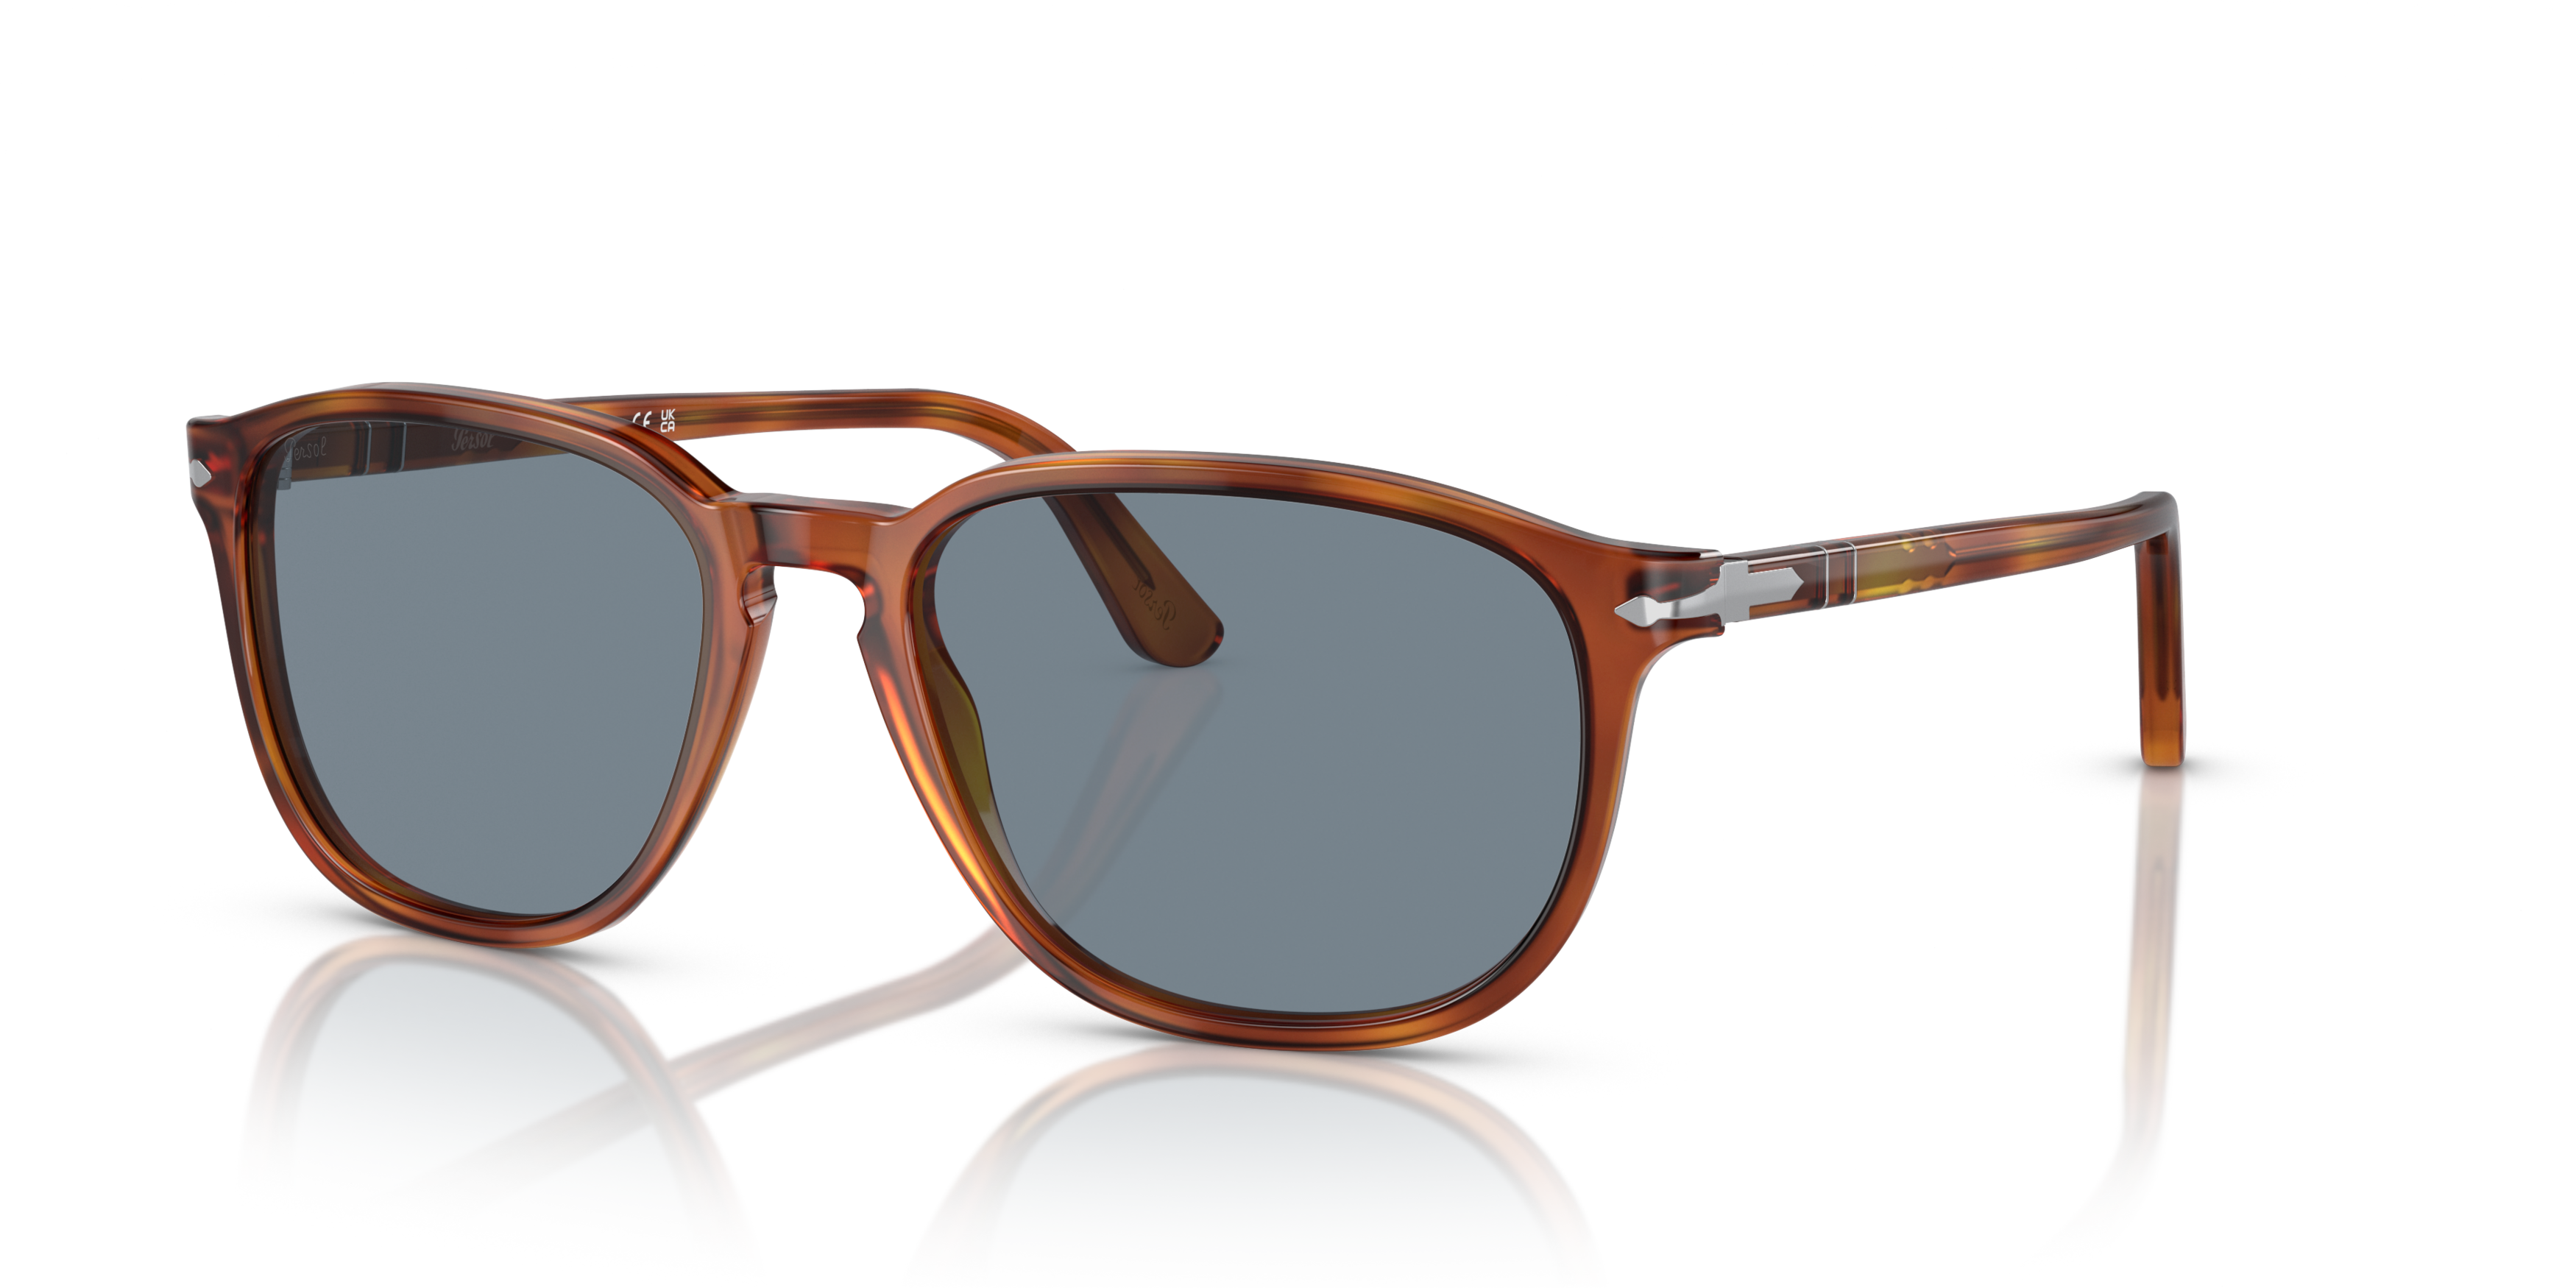 [products.image.angle_left01] Persol 0PO3019S 96/56